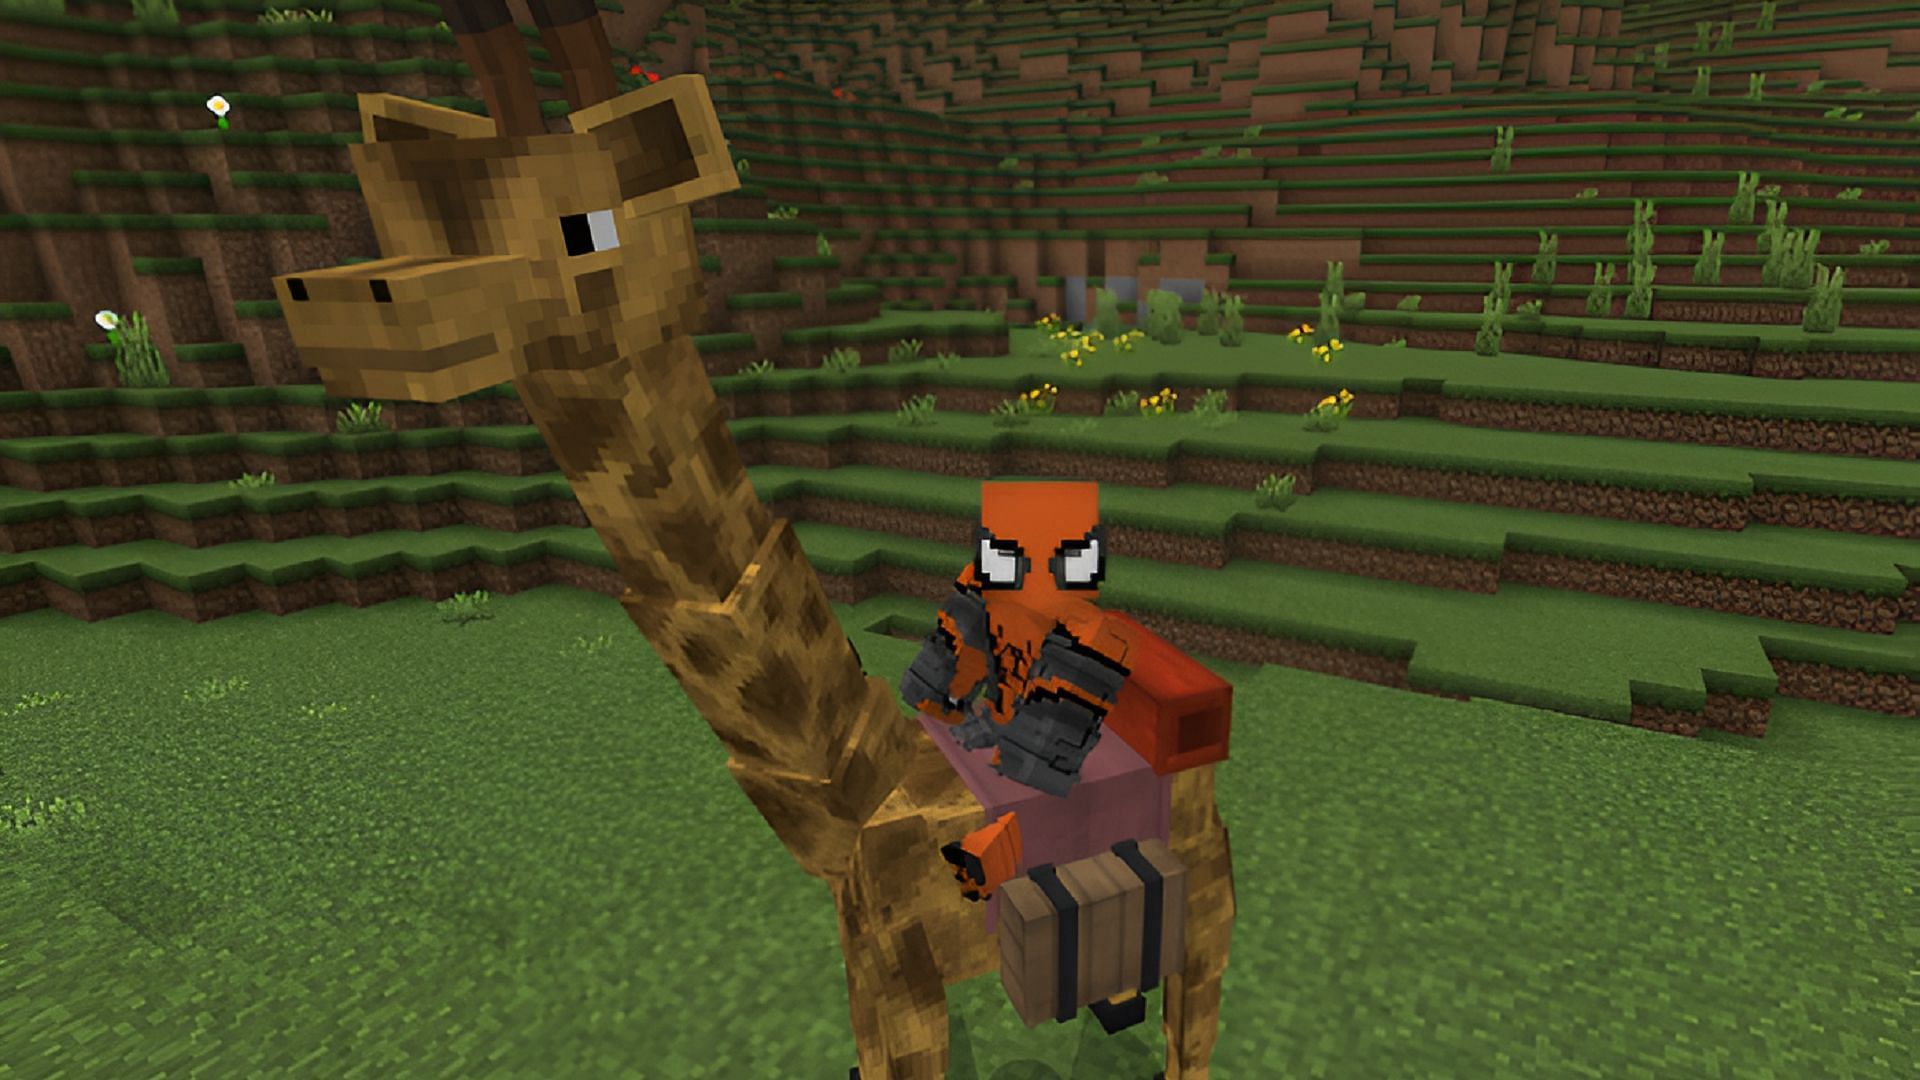 Experience an expanded set of wild animals in Minecraft with the World Animals Add-On (Image via ArathNidoGamer/MCPEDL)